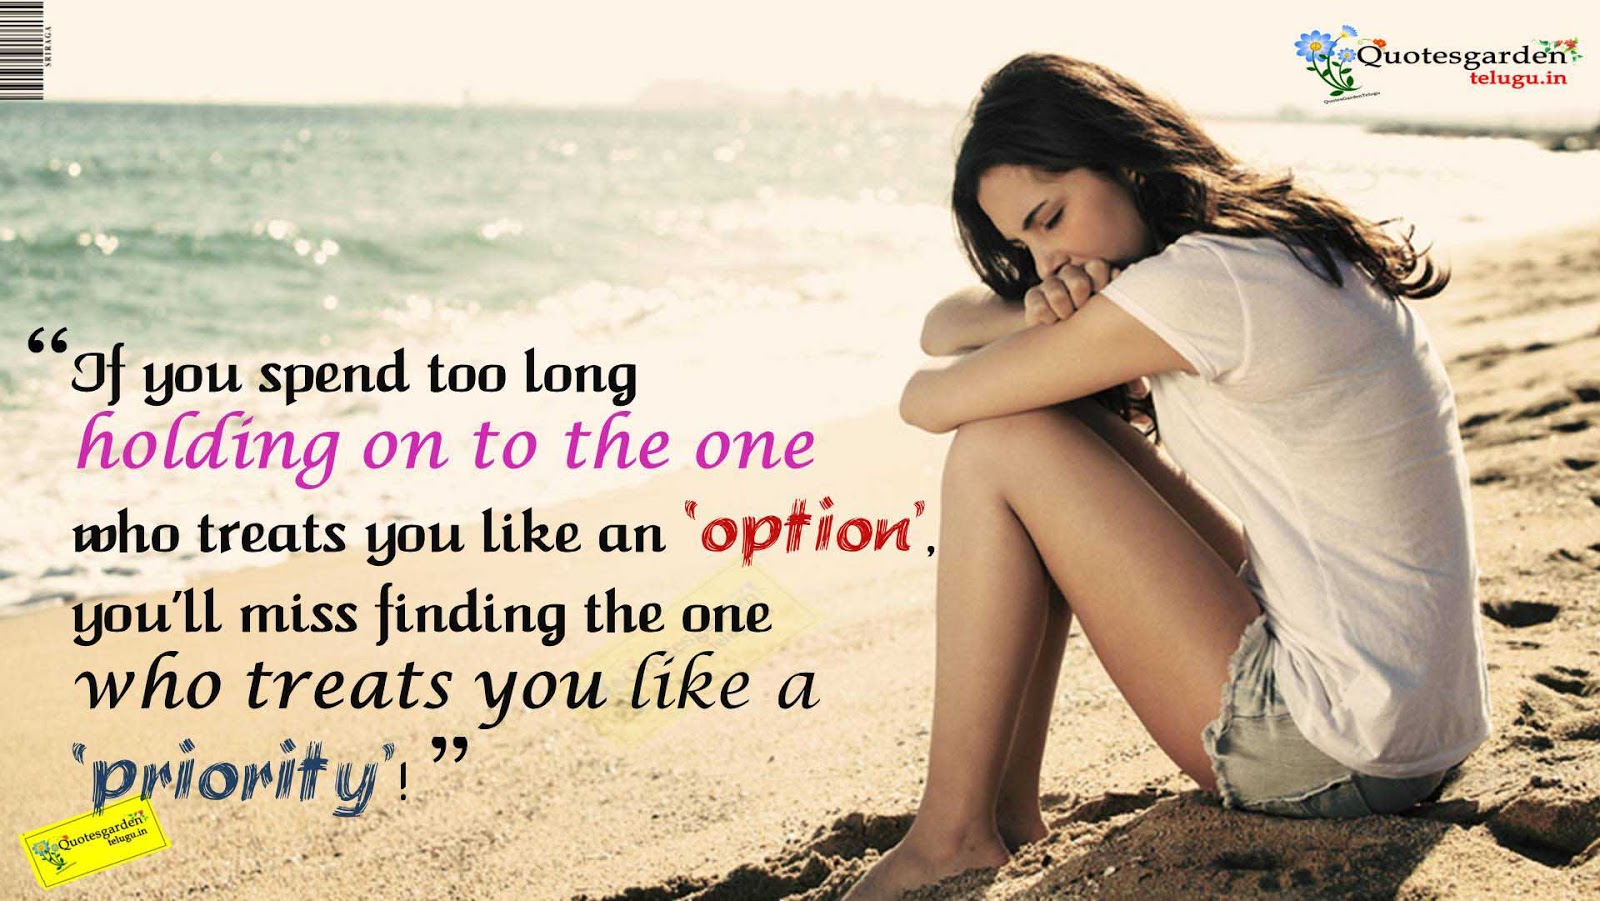 Heart touching sad love quotes with hd wallpapers 740 | QUOTES GARDEN